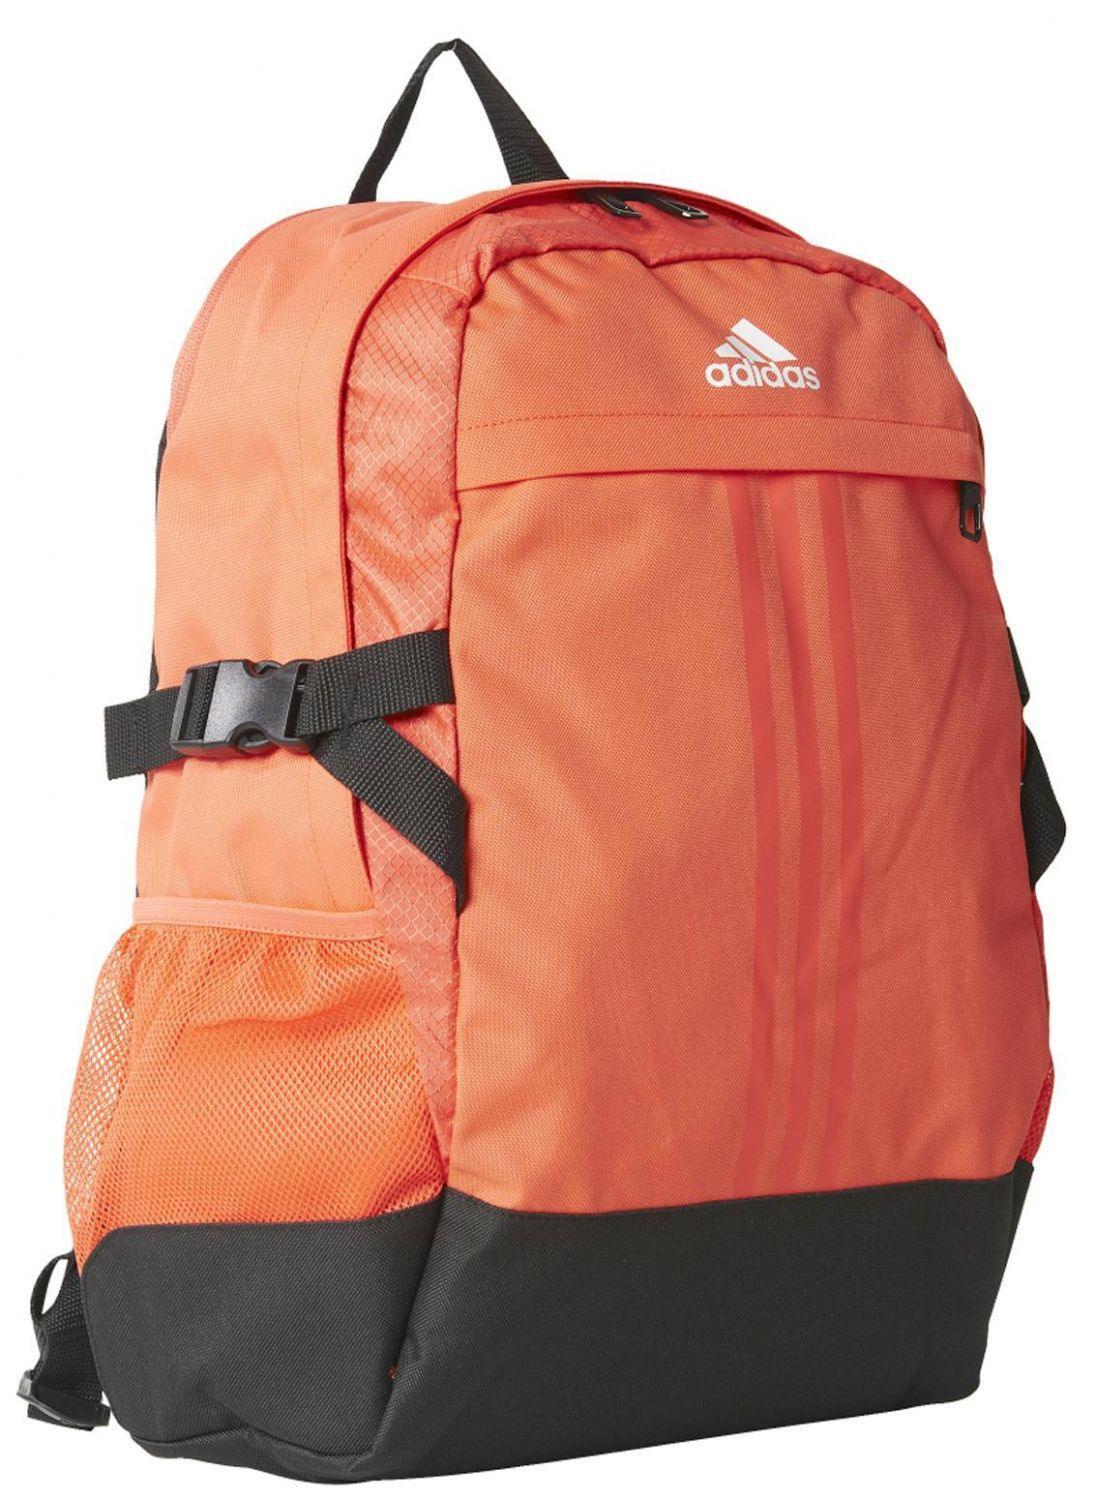 adidas Backpack Power III M Laptoprucksack (easy coral s17/easy coral s17/white) von Adidas